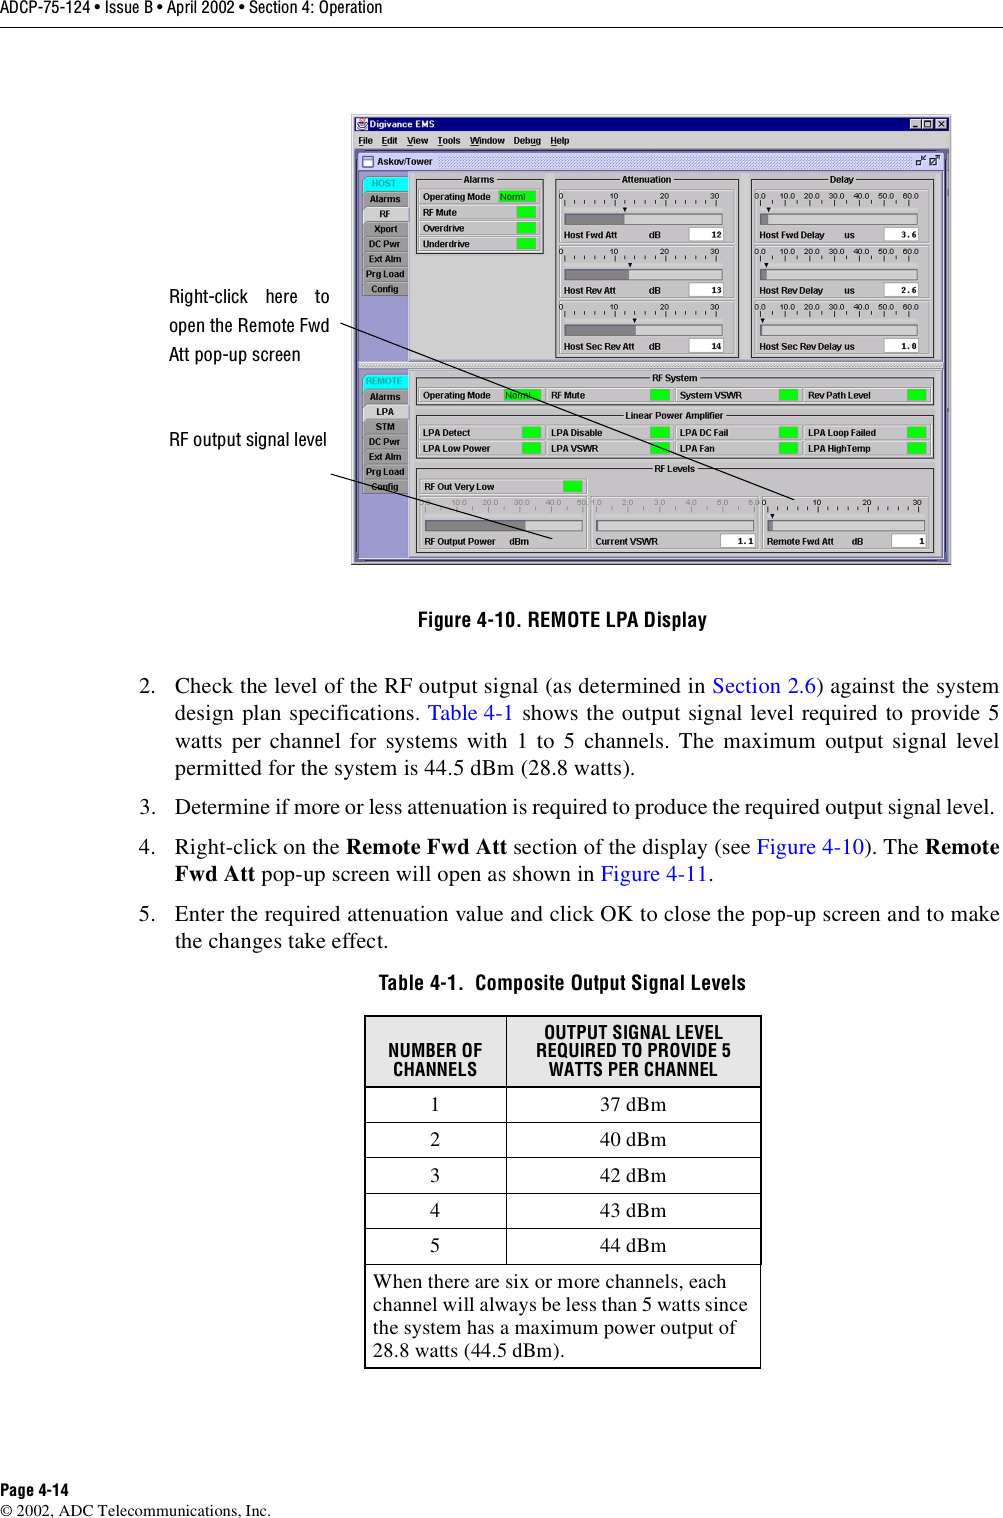 ADCP-75-124 • Issue B • April 2002 • Section 4: OperationPage 4-14©2002, ADC Telecommunications, Inc.Figure 4-10. REMOTE LPA Display2. Check the level of the RF output signal (as determined in Section 2.6)against the systemdesign plan specifications. Table 4-1 shows the output signal level required to provide 5watts per channel for systems with 1to 5channels. The maximum output signal levelpermitted for the system is 44.5 dBm (28.8 watts).3. Determine if more or less attenuation is required to produce the required output signal level.4. Right-click on the Remote Fwd Att section of the display (see Figure 4-10). The RemoteFwd Att pop-up screen will open as shown in Figure 4-11.5. Enter the required attenuation value and click OK to close the pop-up screen and to makethe changes take effect.Table 4-1.  Composite Output Signal LevelsNUMBER OF CHANNELSOUTPUT SIGNAL LEVEL REQUIRED TO PROVIDE 5 WATTS PER CHANNEL 137dBm240dBm342dBm443dBm544dBmWhen there are six or more channels, eachchannel will always be less than 5watts sincethe system has amaximum power output of28.8 watts (44.5 dBm).Right-click here toopen the Remote FwdAtt pop-up screenRF output signal level